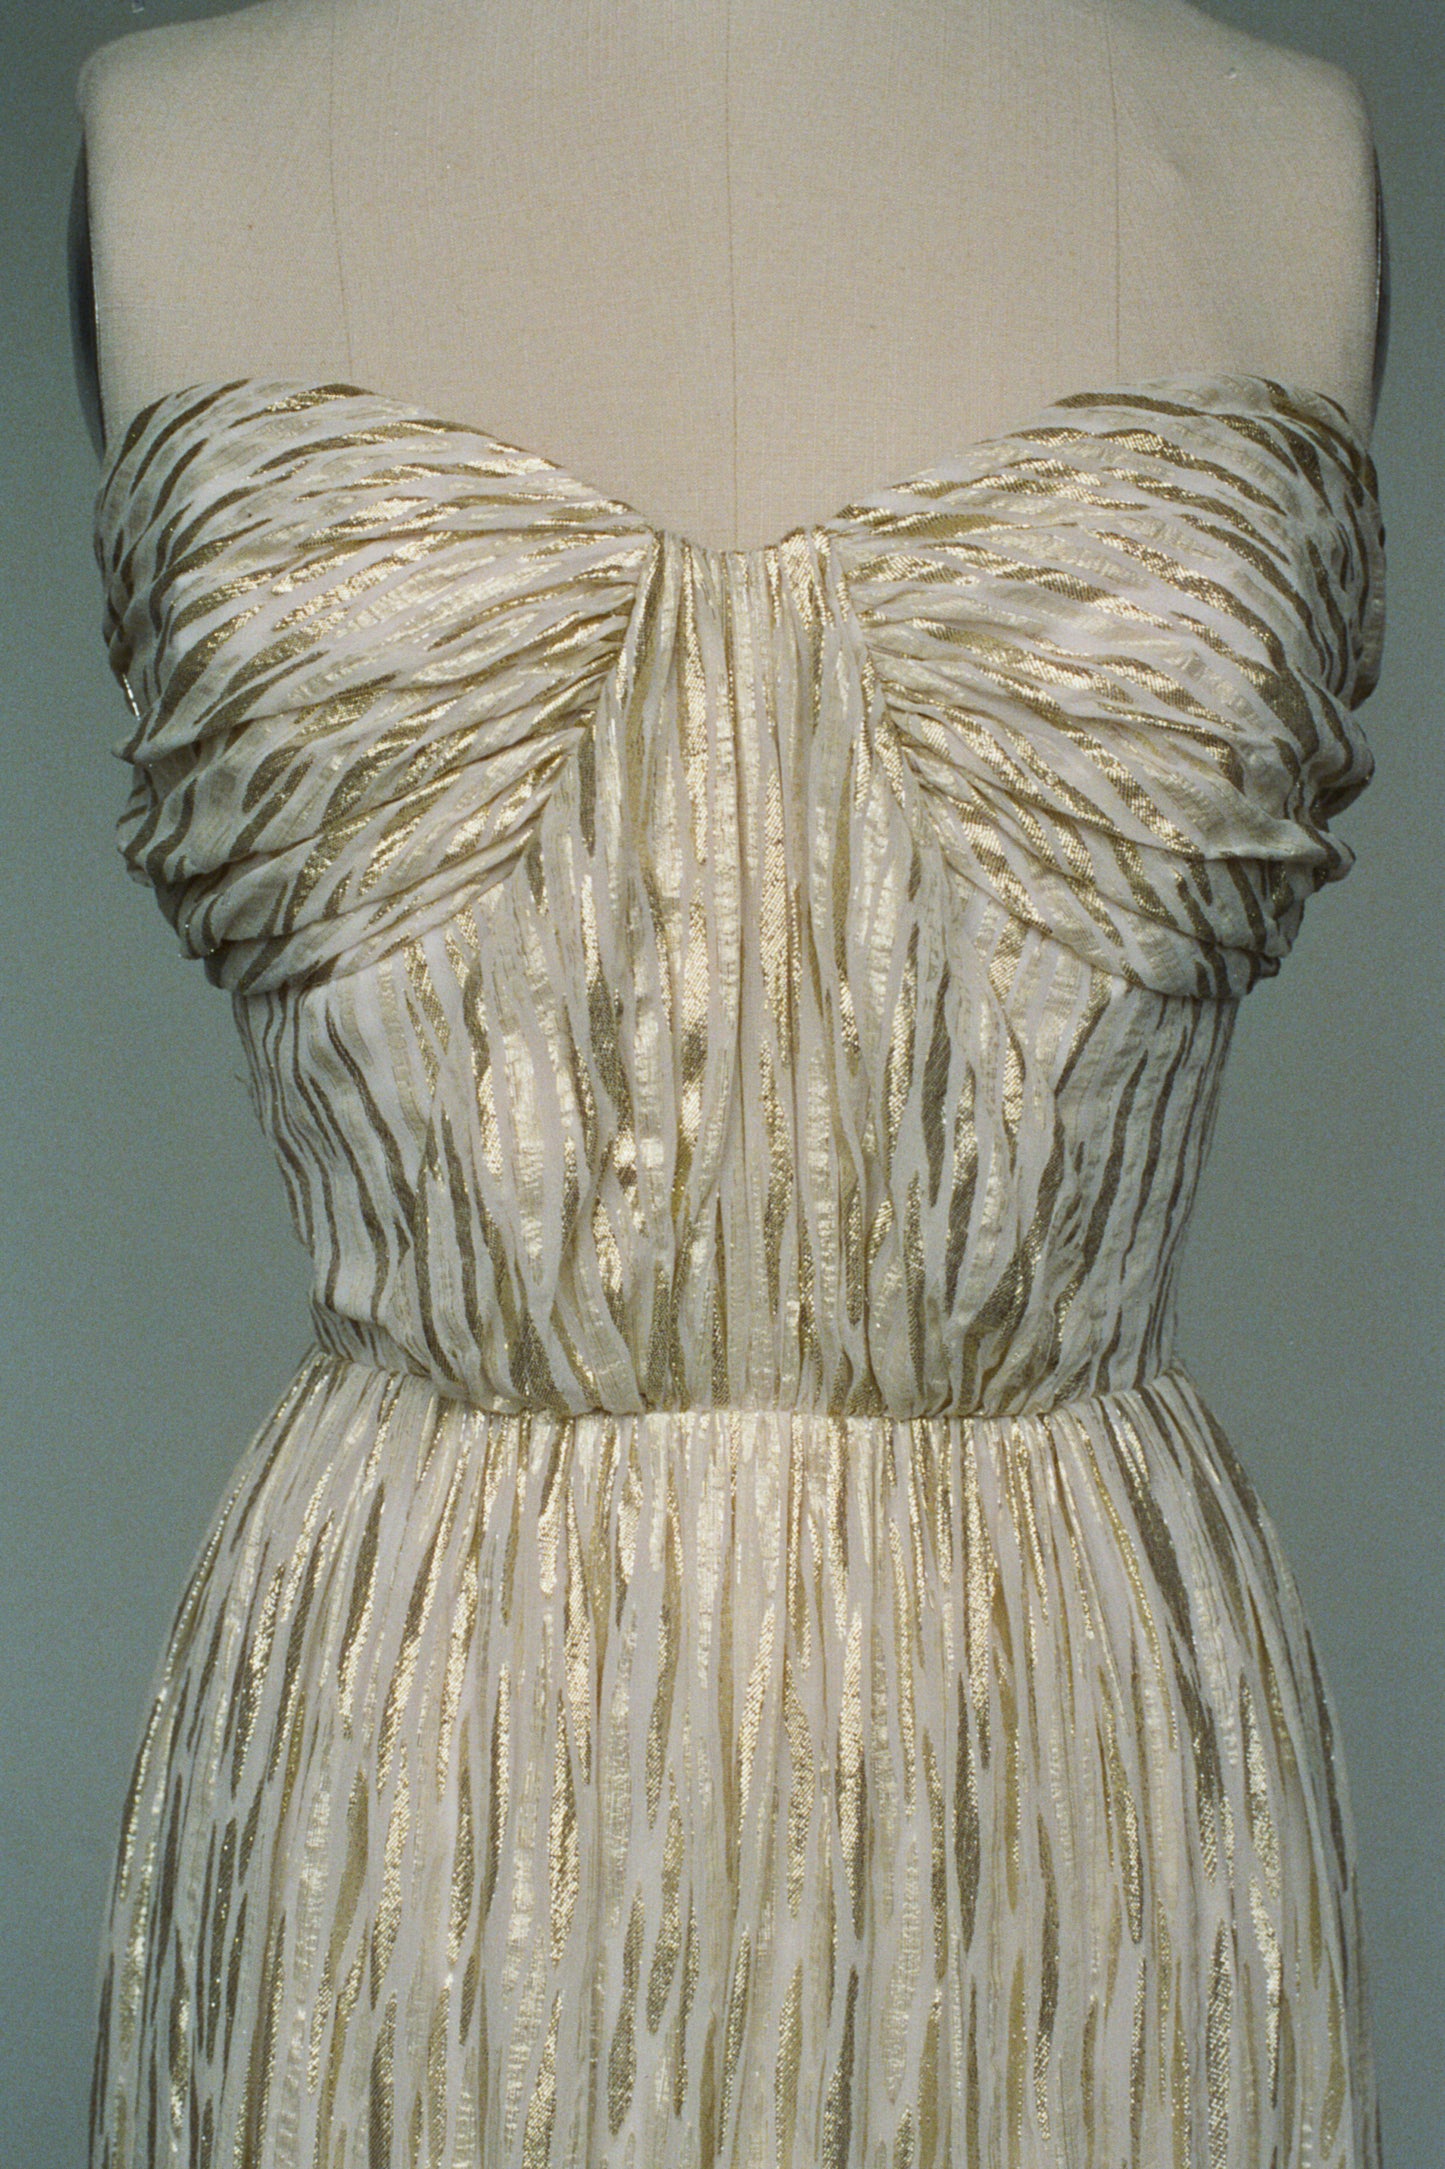 Bustier dress with gold railings